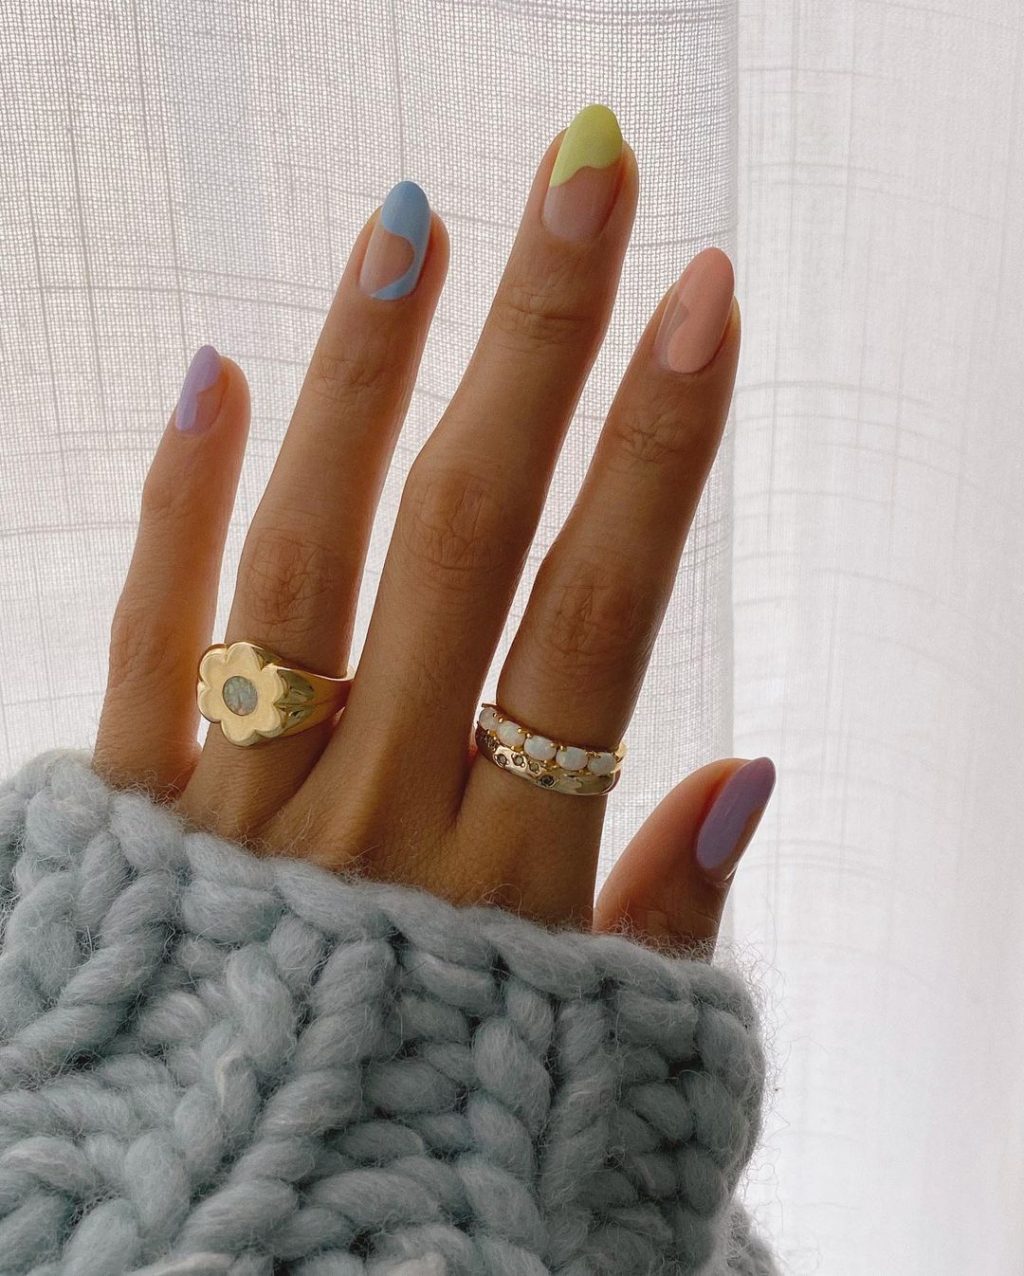 What Are The Hottest Spring Manicure Trends For 2021?